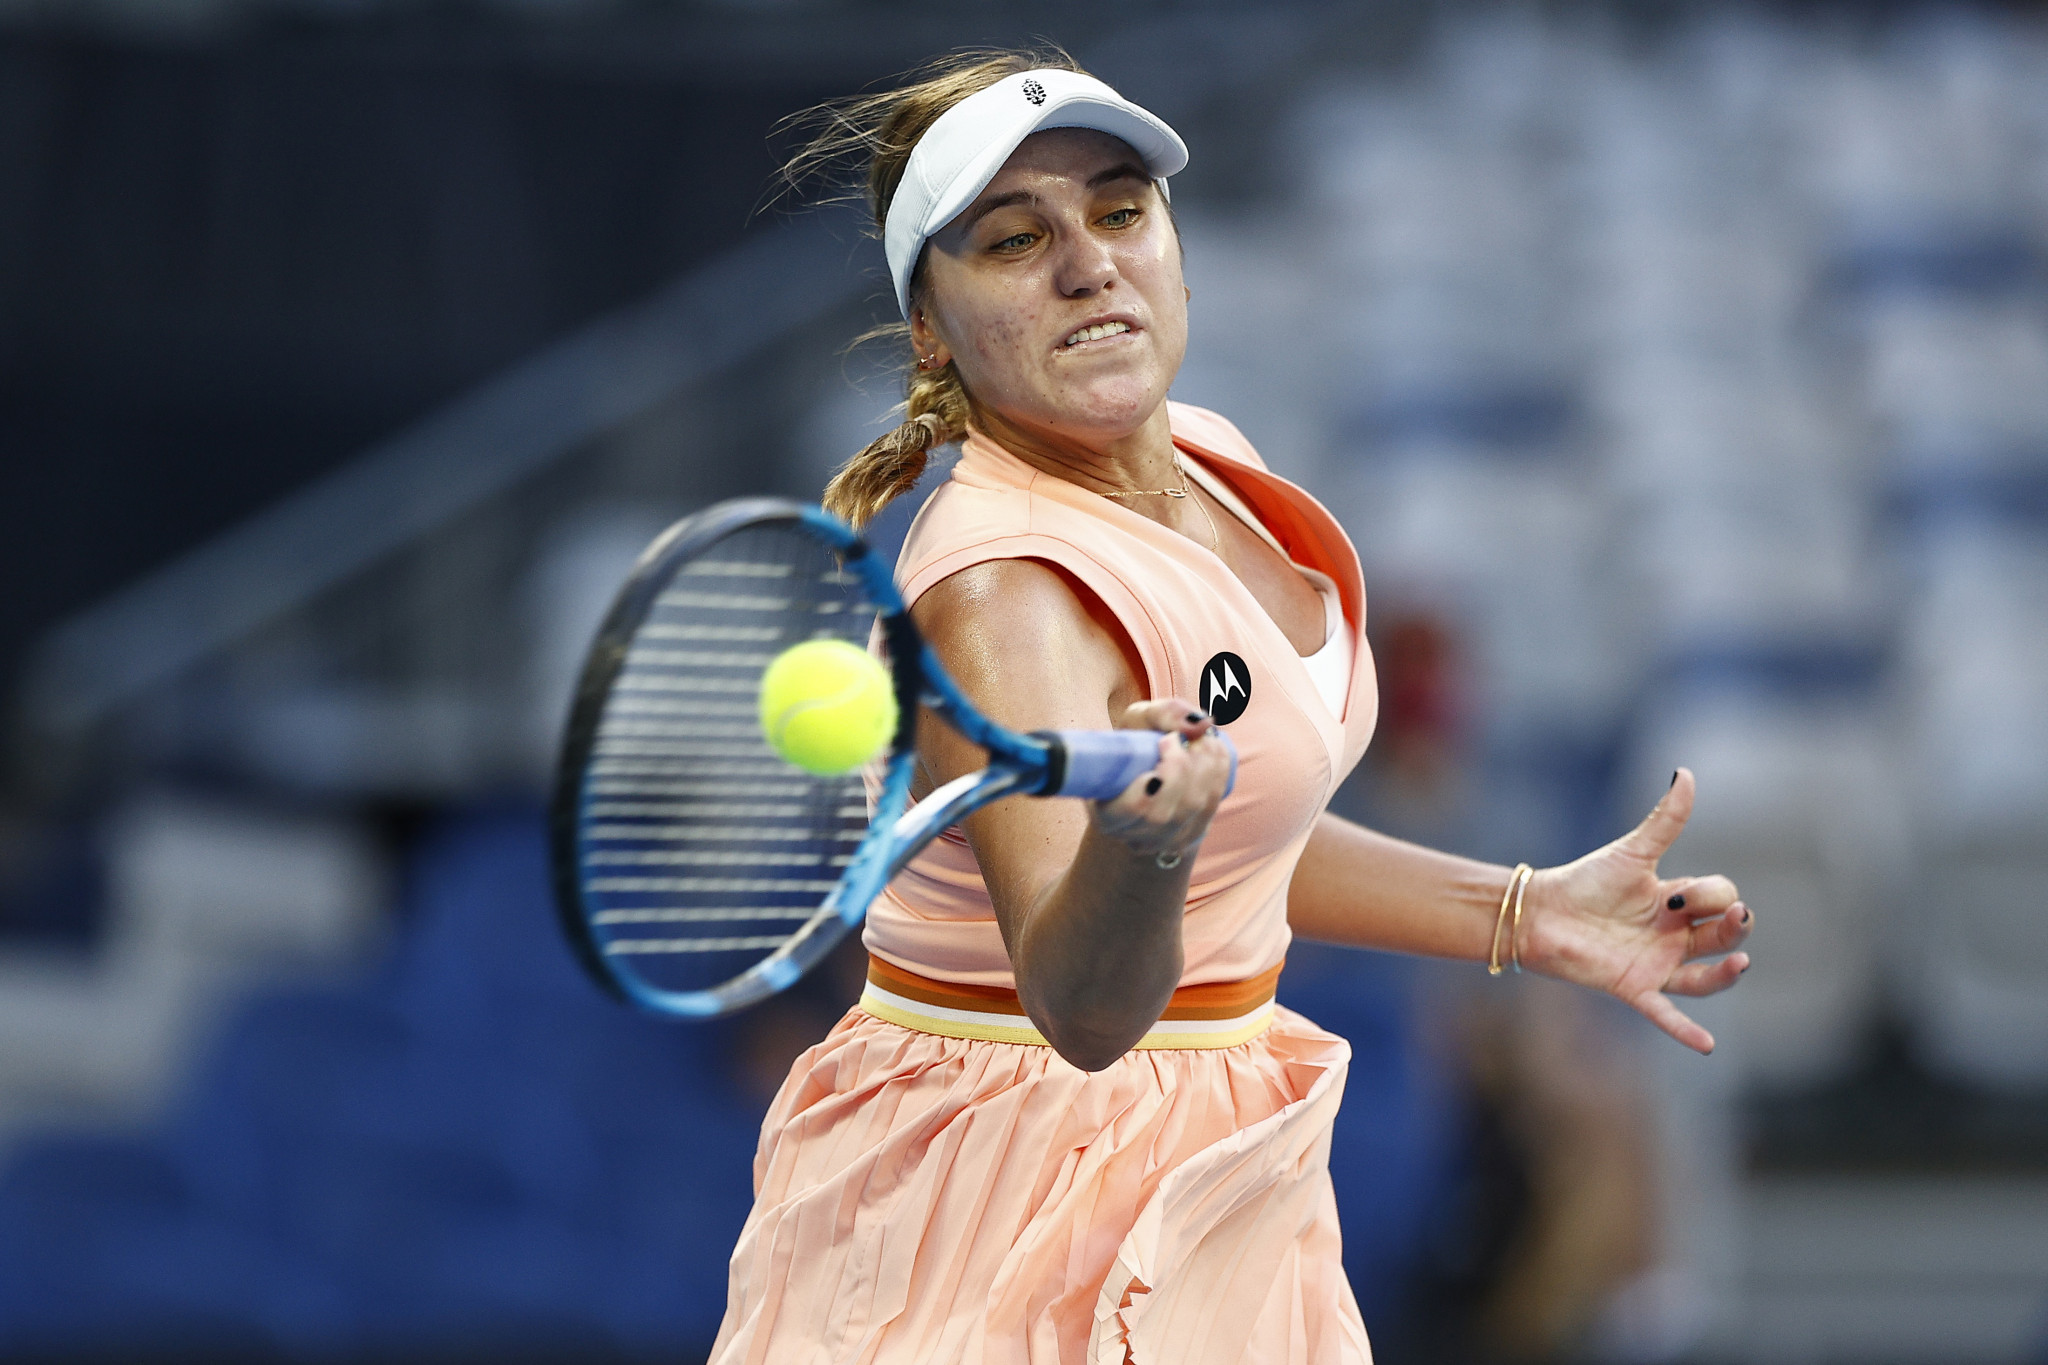 Sofia Kenin lost to Madison Keys in an all-American first-round encounter in Melbourne ©Getty Images